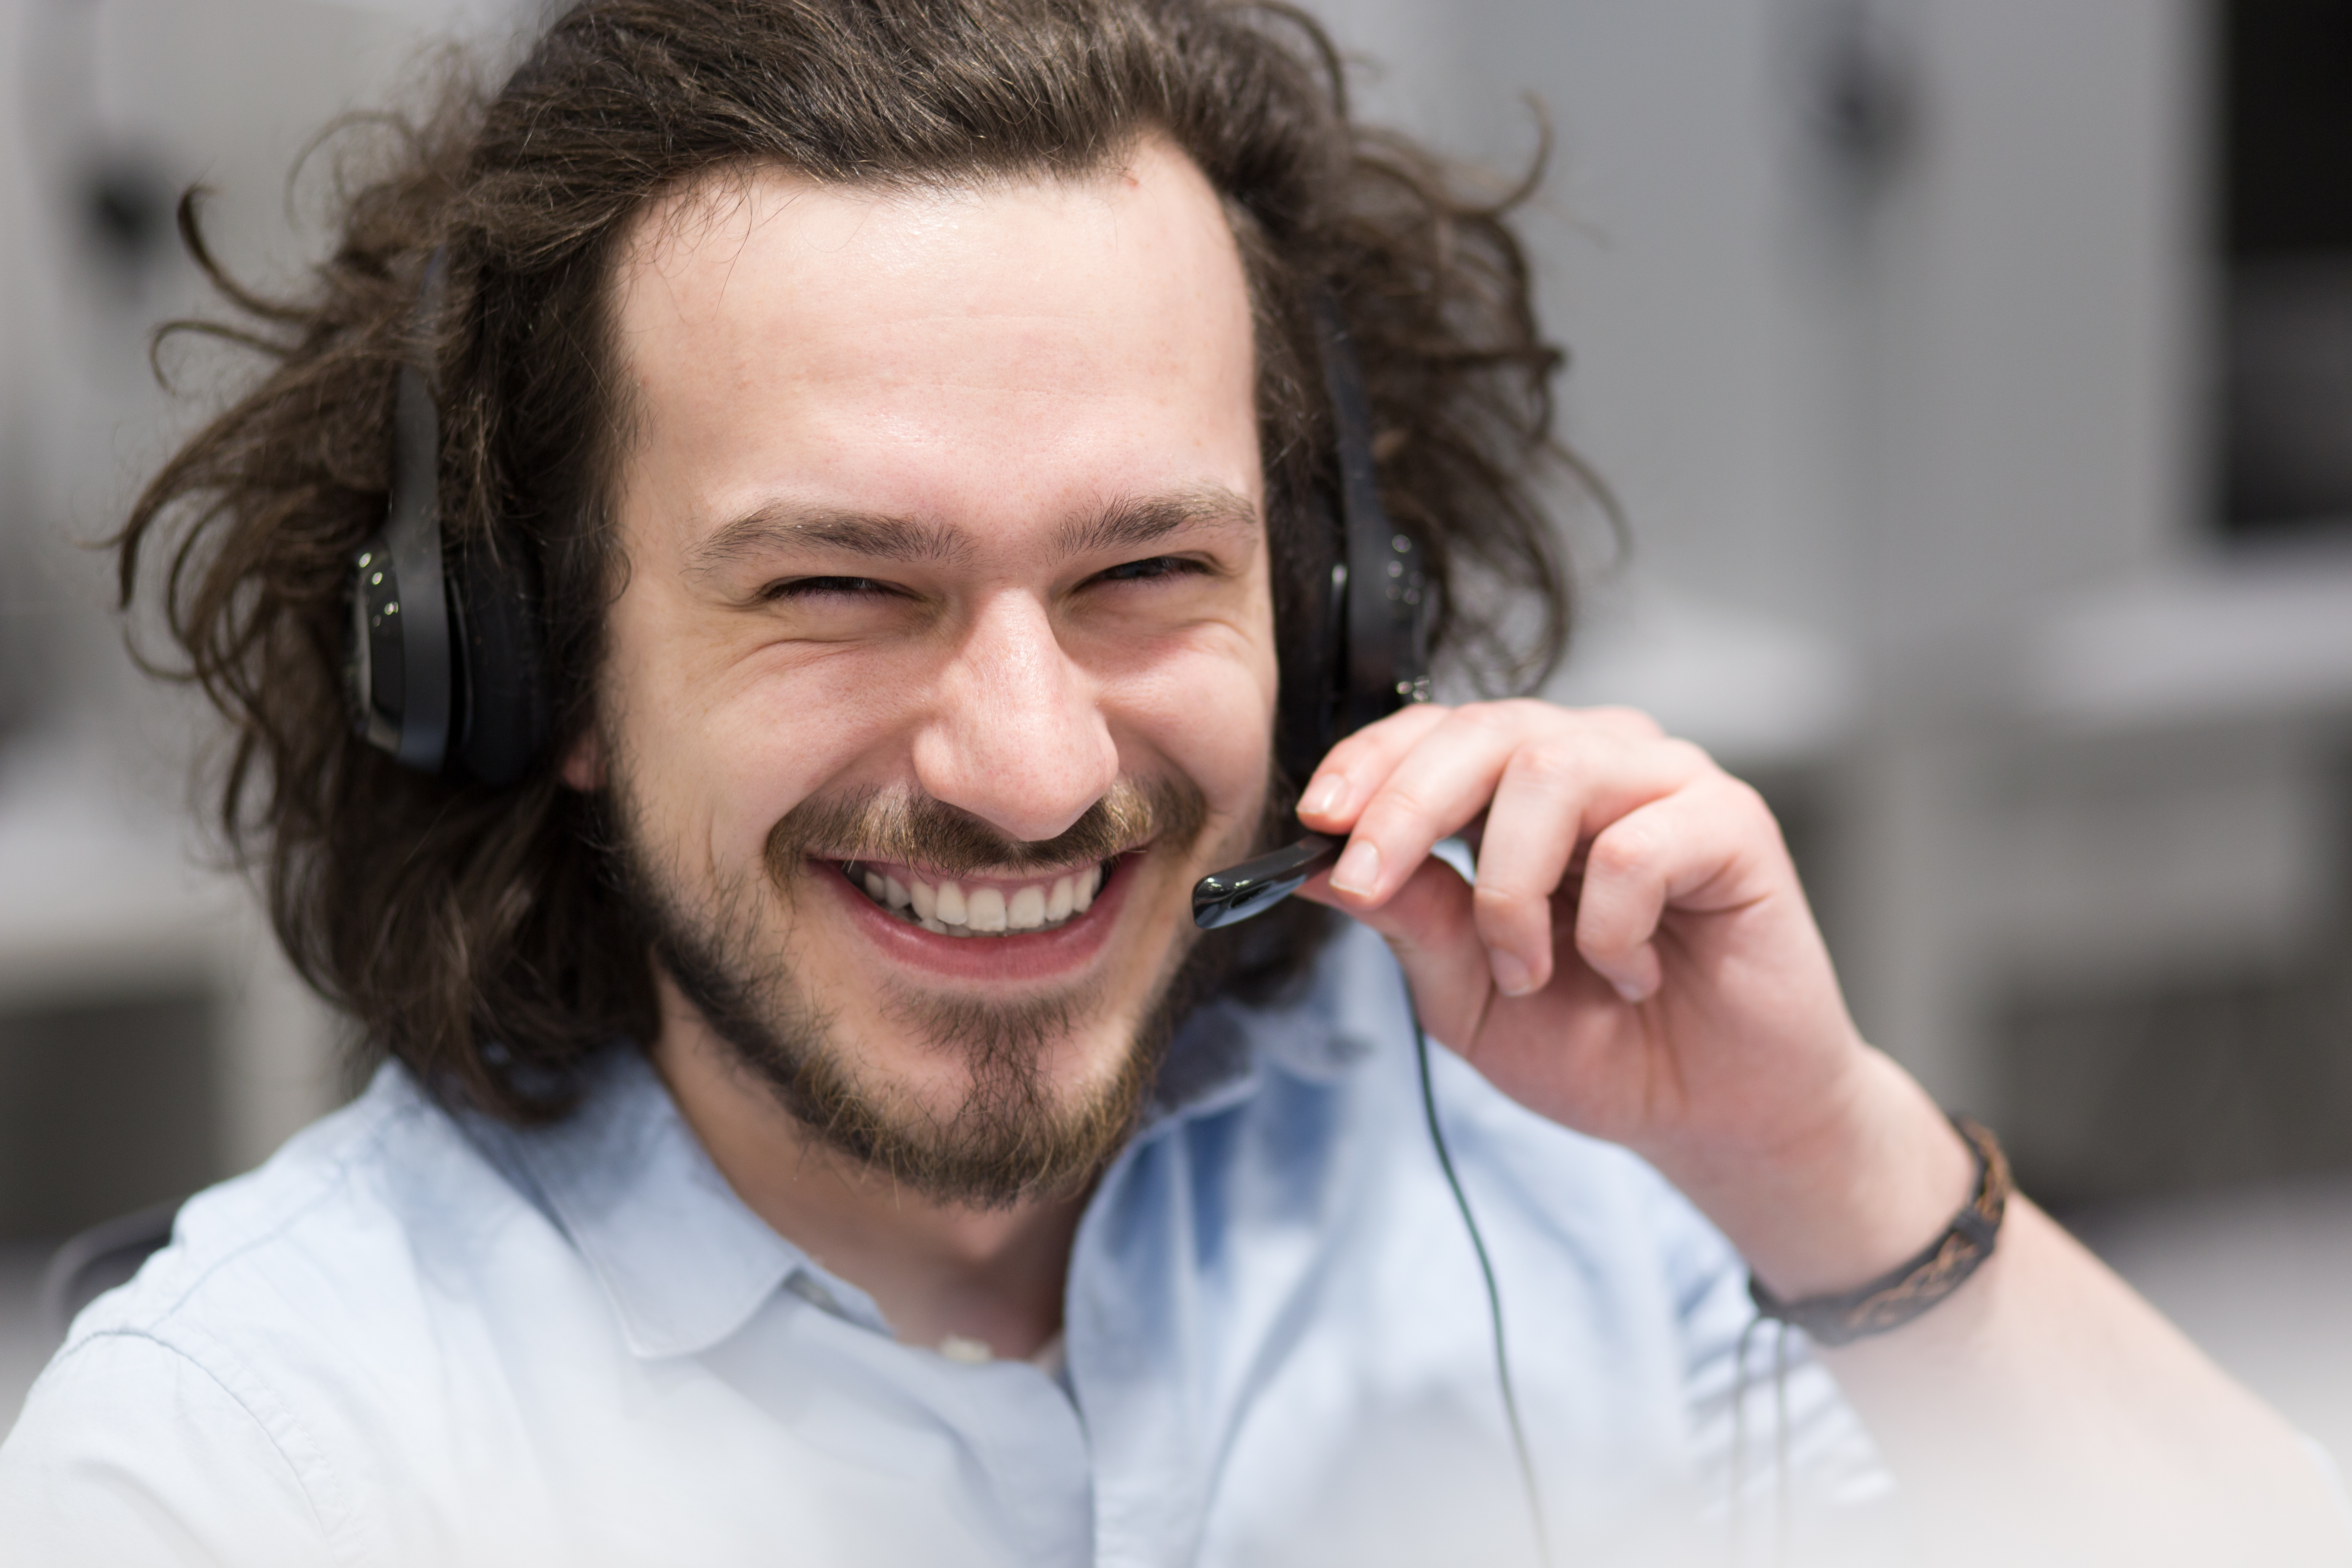 young male smiling while on the phone doing his job with a headset